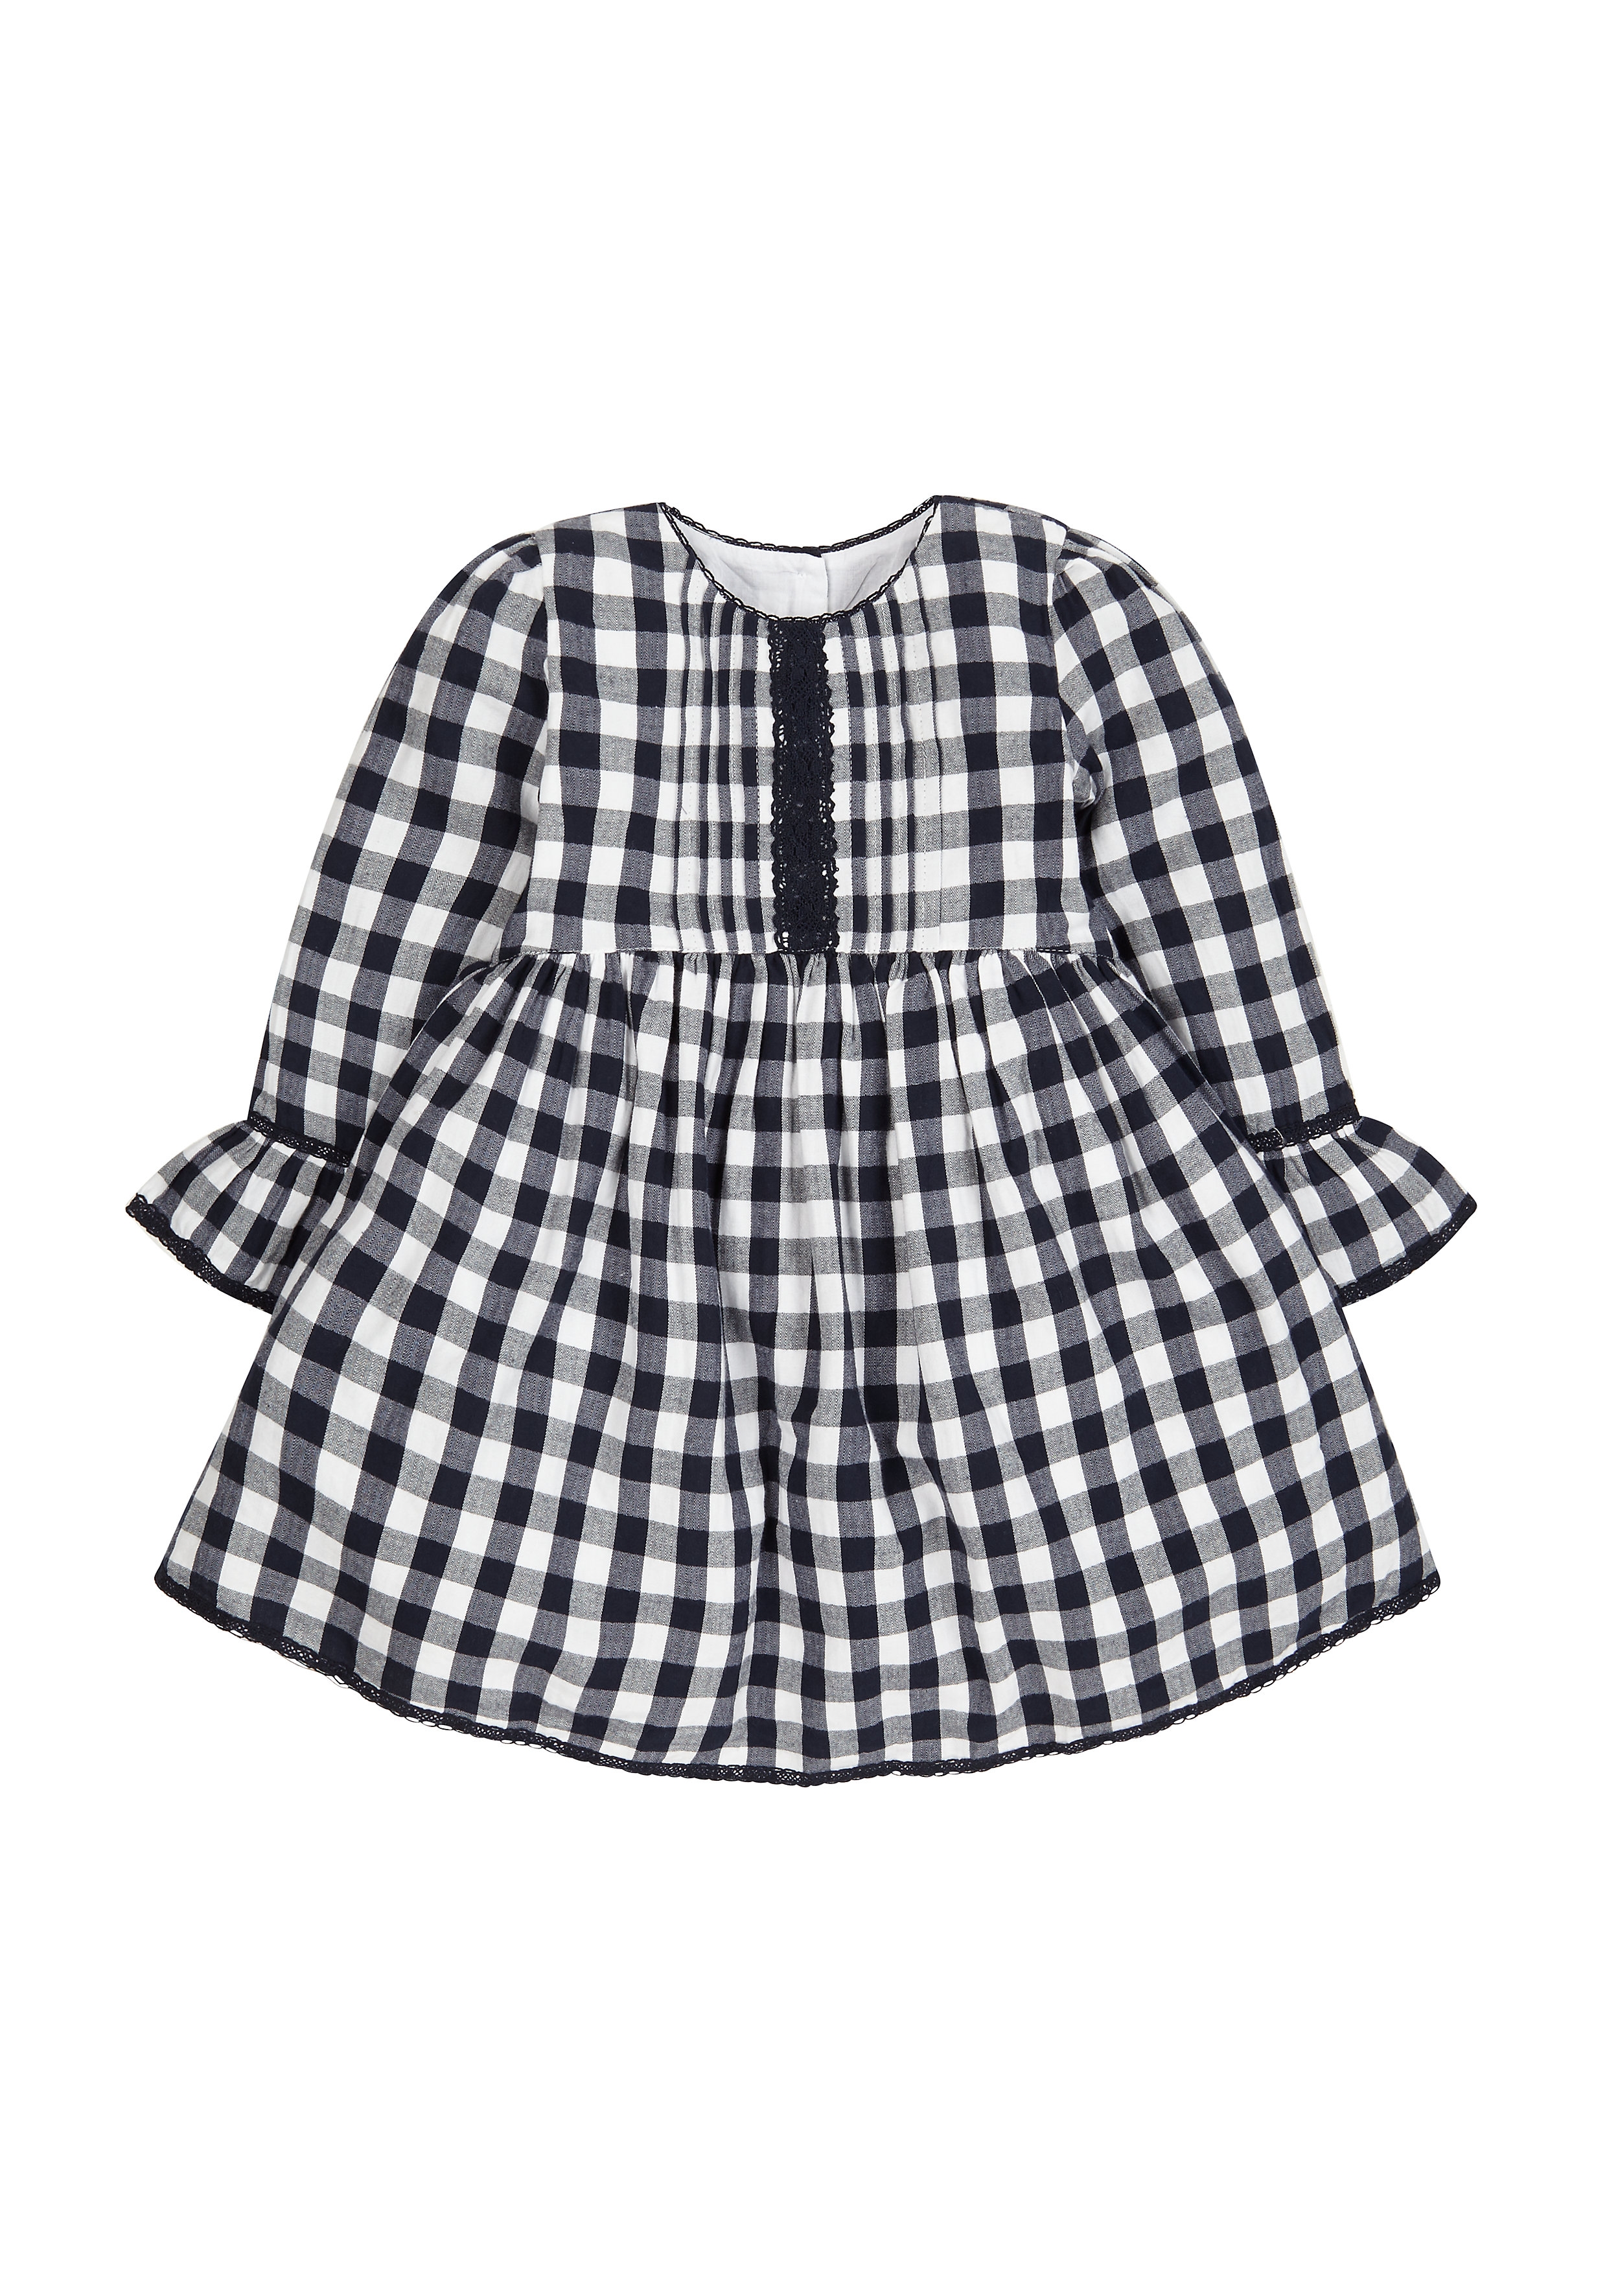 Mothercare | Girls Full Sleeves Dress Checks And Lace Detail - Black